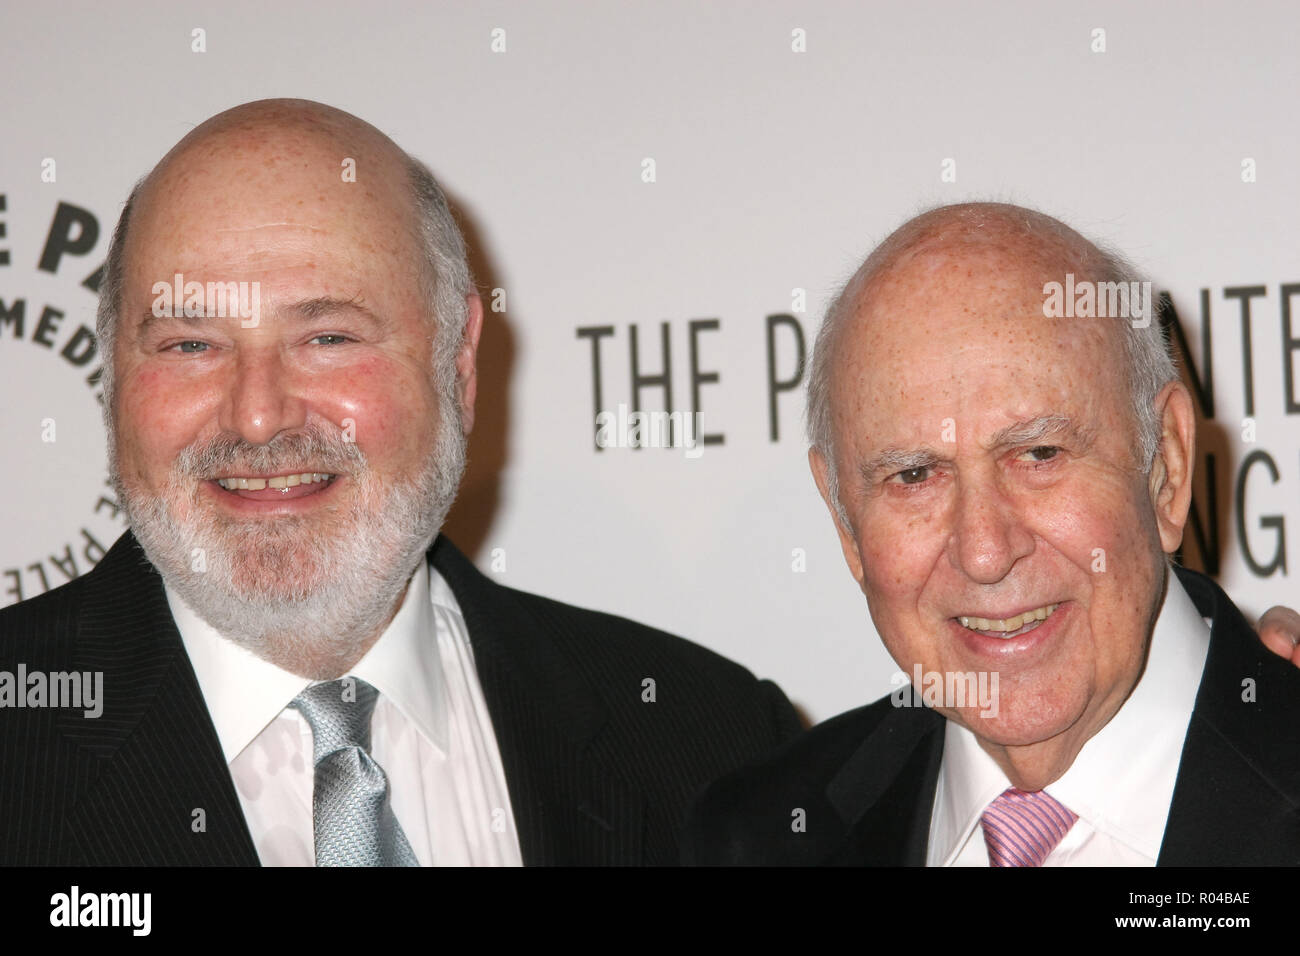 Rob Reiner, Carl Reiner  12/11/08'The Paley Center for Media honors Showtime  Networks Inc. and Carl Reiner'  @ Hyatt Regency Century Plaza, Century City Photo by Ima Kuroda/HNW / PictureLux  (December 11, 2008) File Reference # 33689 536HNWPLX Stock Photo